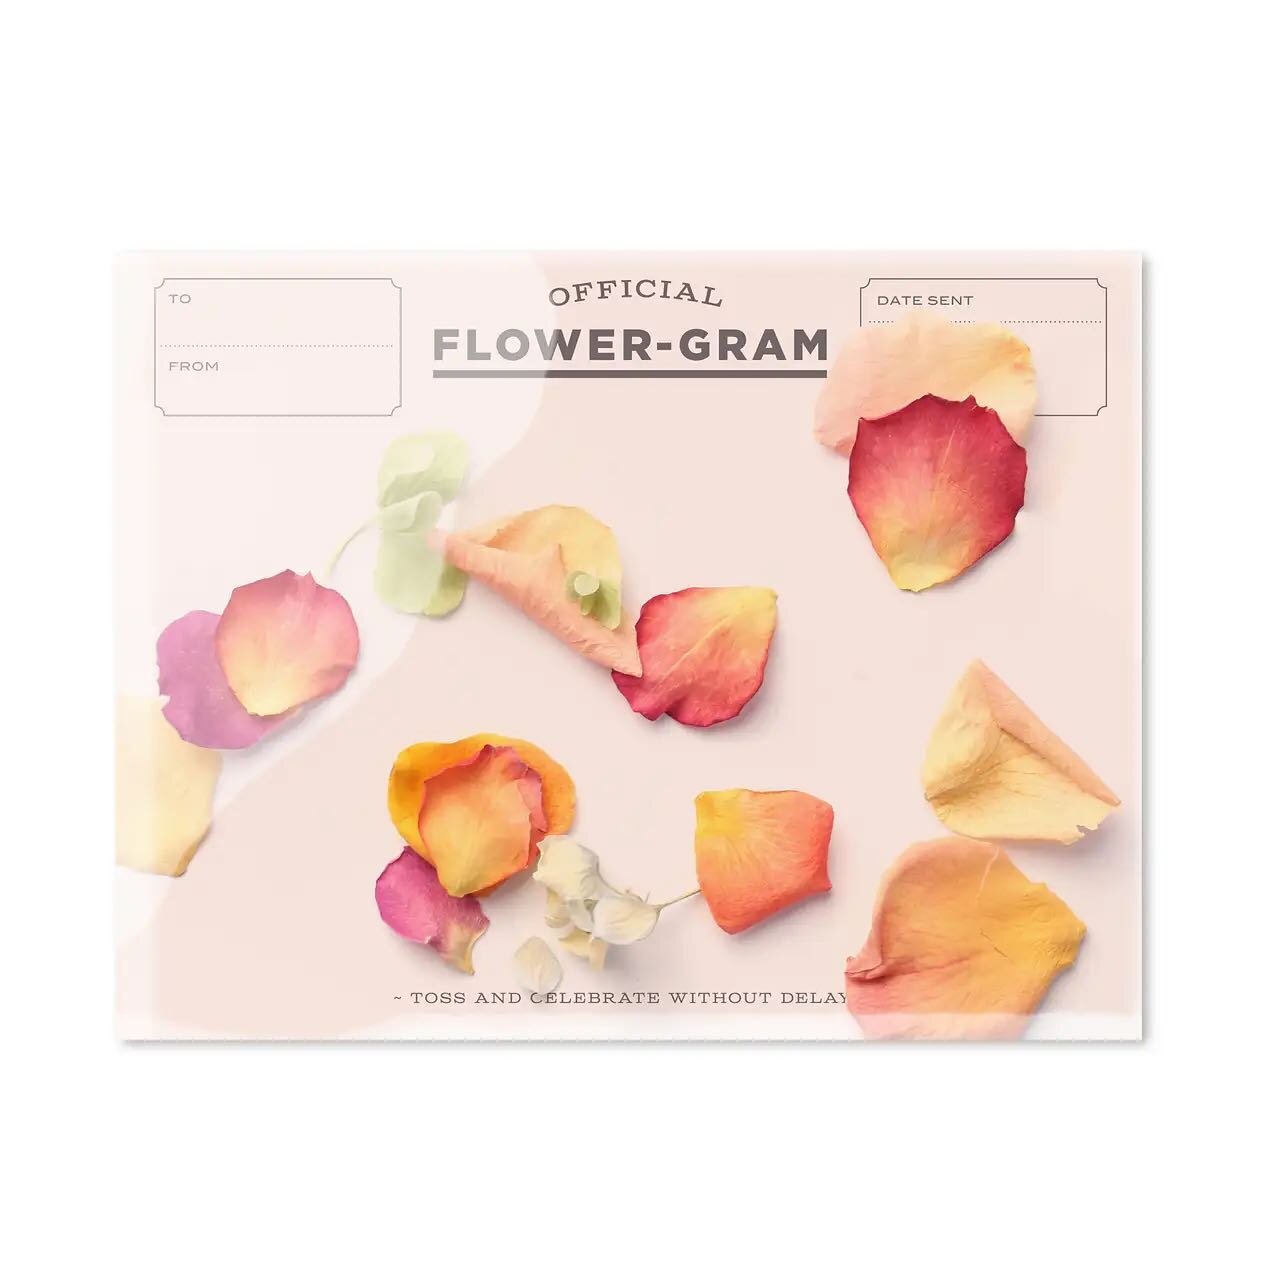 you can send this flowergram in the clear envelope it comes in! send some peony + rose +  hydrangea petals to someone you love 🌸

this card is part of the jan//feb//march collection! subscribe before the end of the month to snag it. 

image + art: @